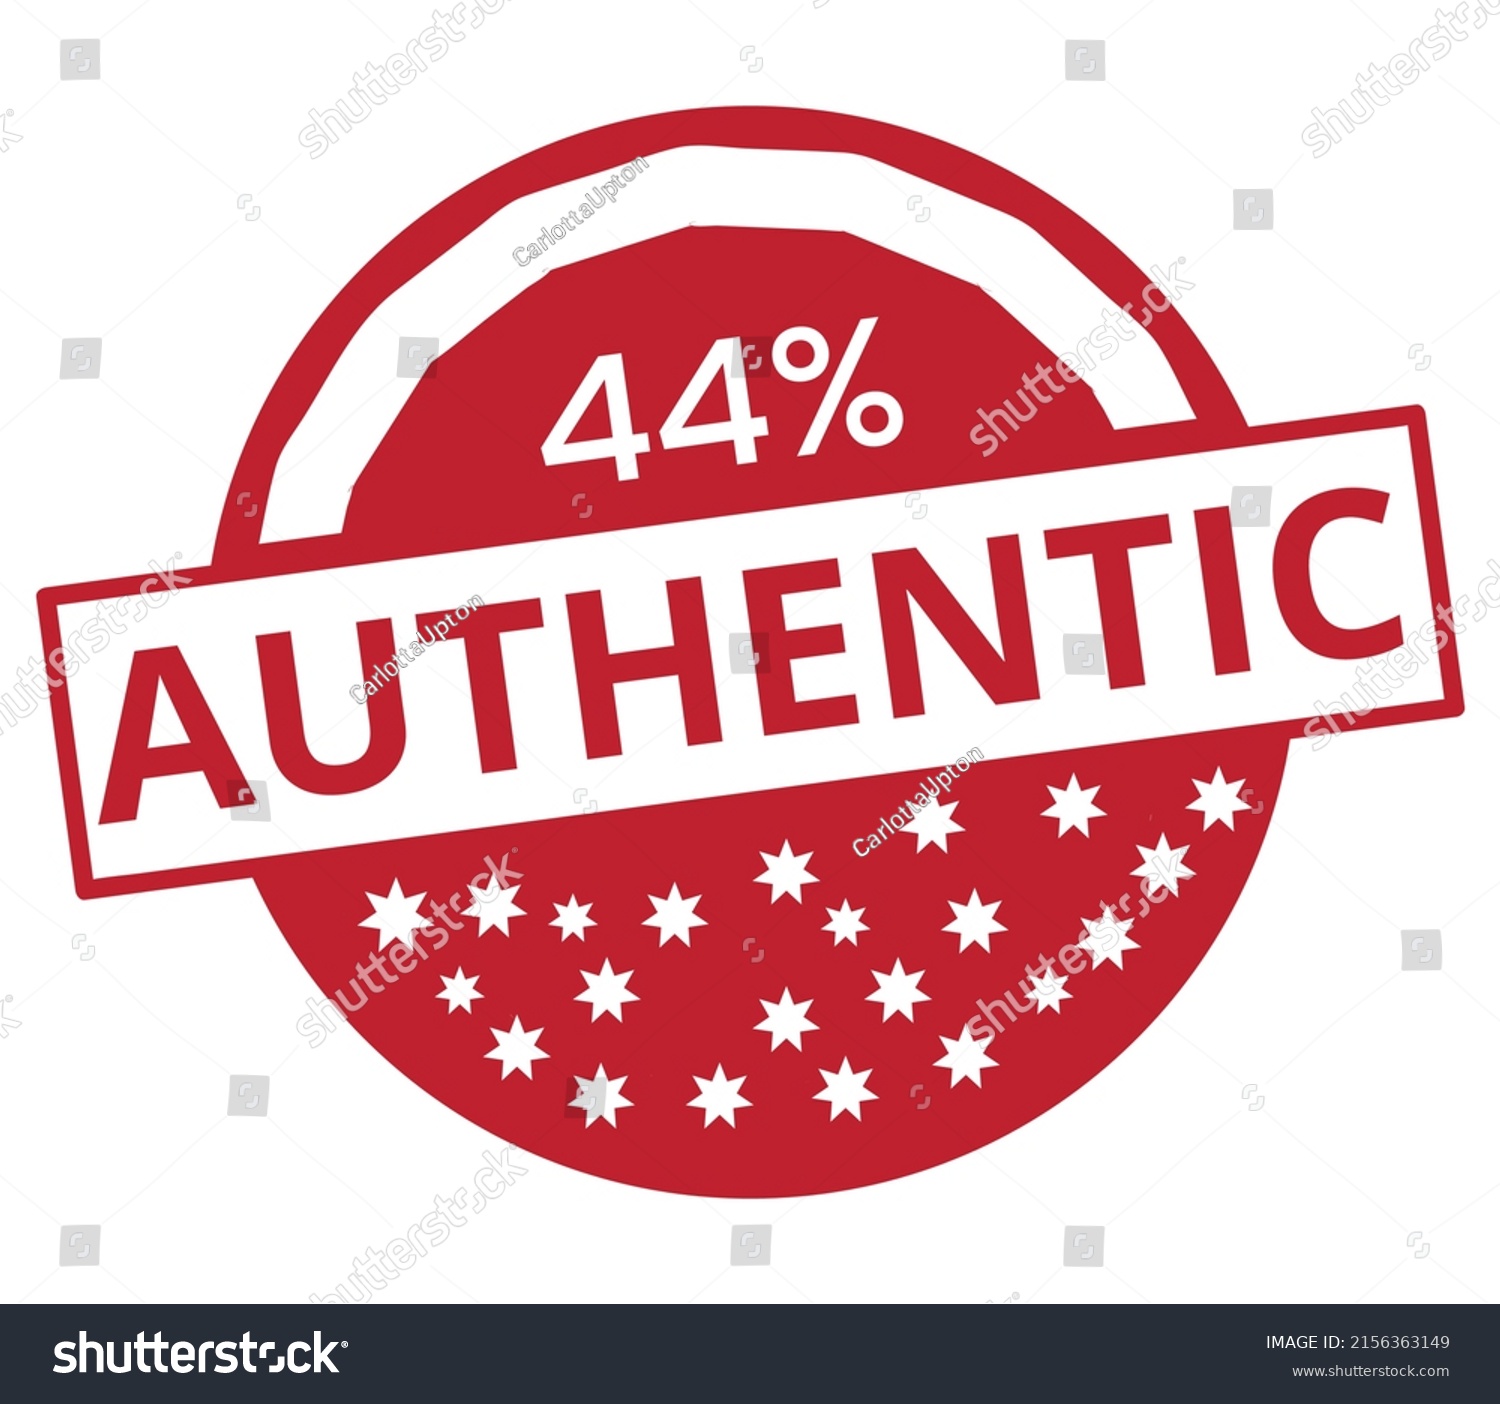 44% percentage Authentic sign label vector art illustration with fantastic font and red color #2156363149